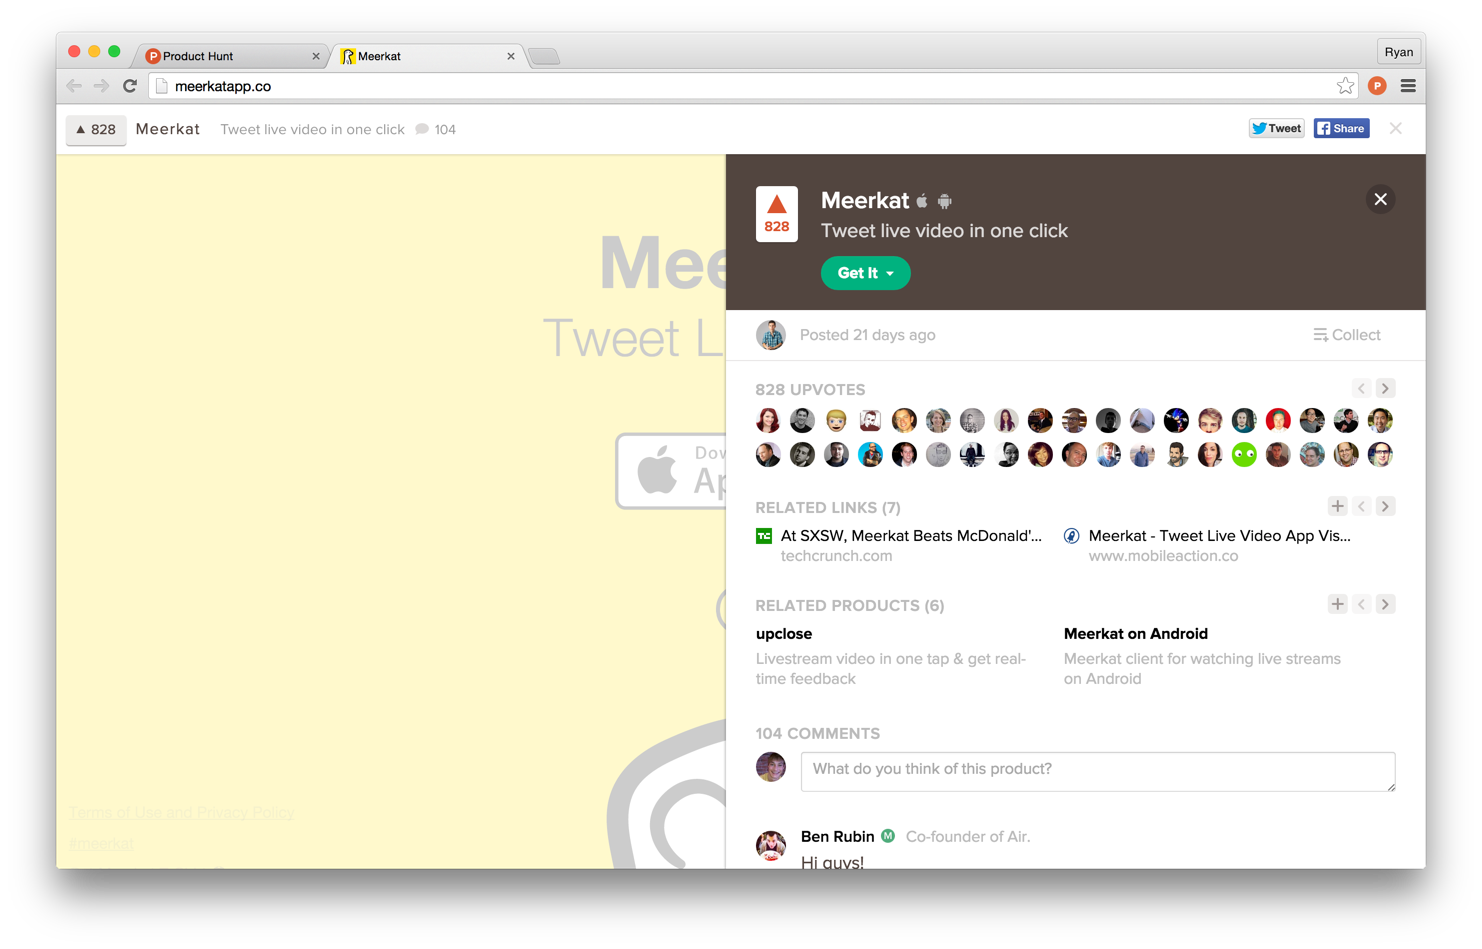 Product-Hunt-Chrome-Extension-View-Discussion